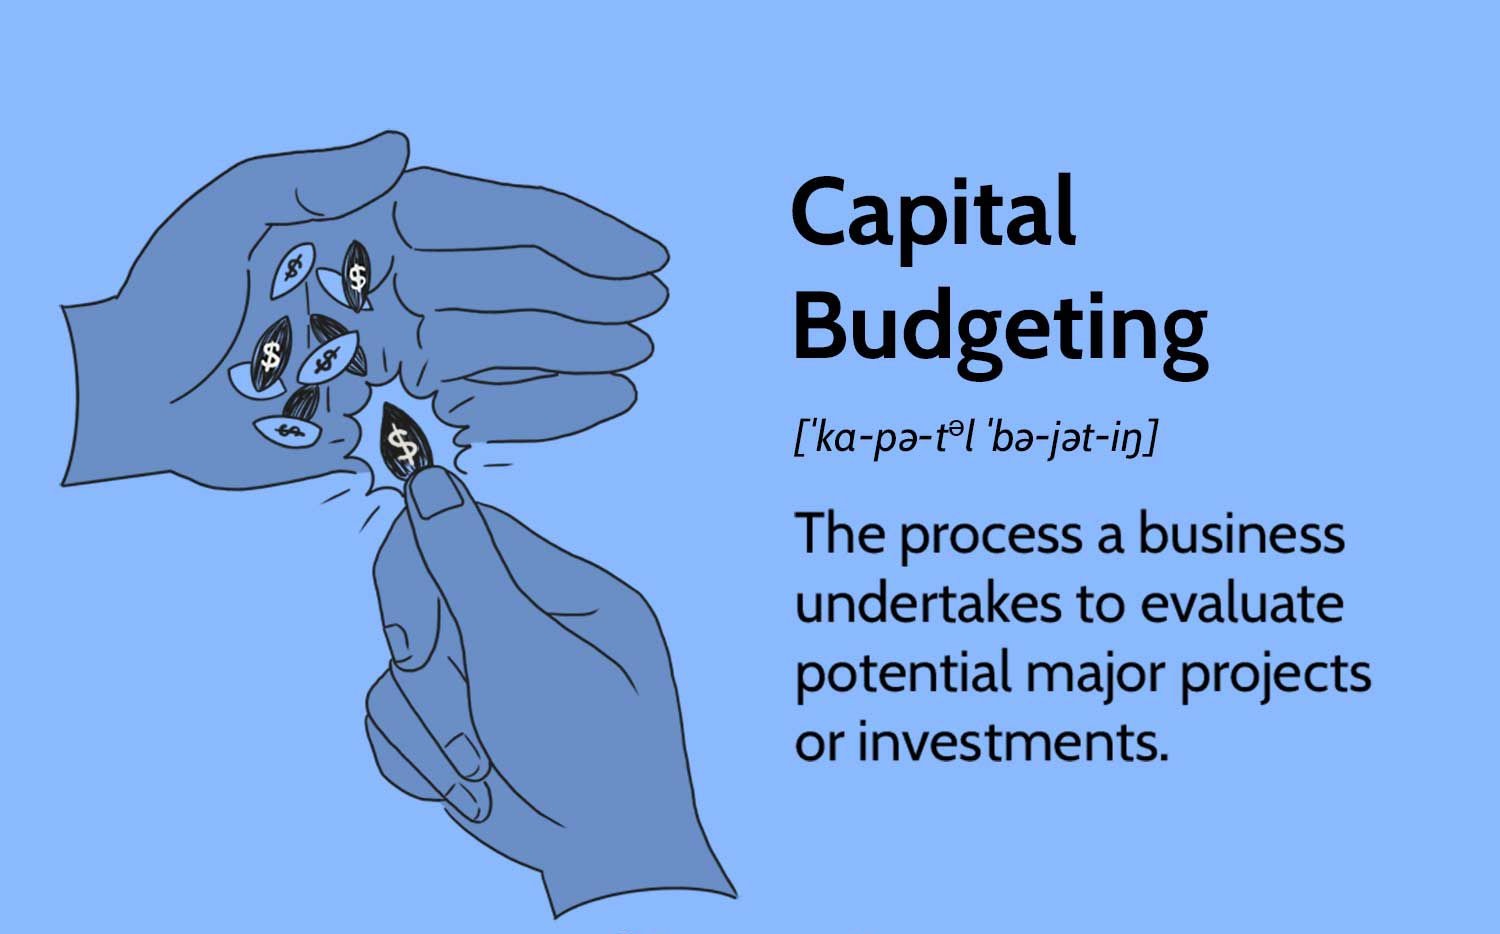 Capital Budgeting Decisions Are Used To Determine How To Raise The Cash Necessary For Investments.